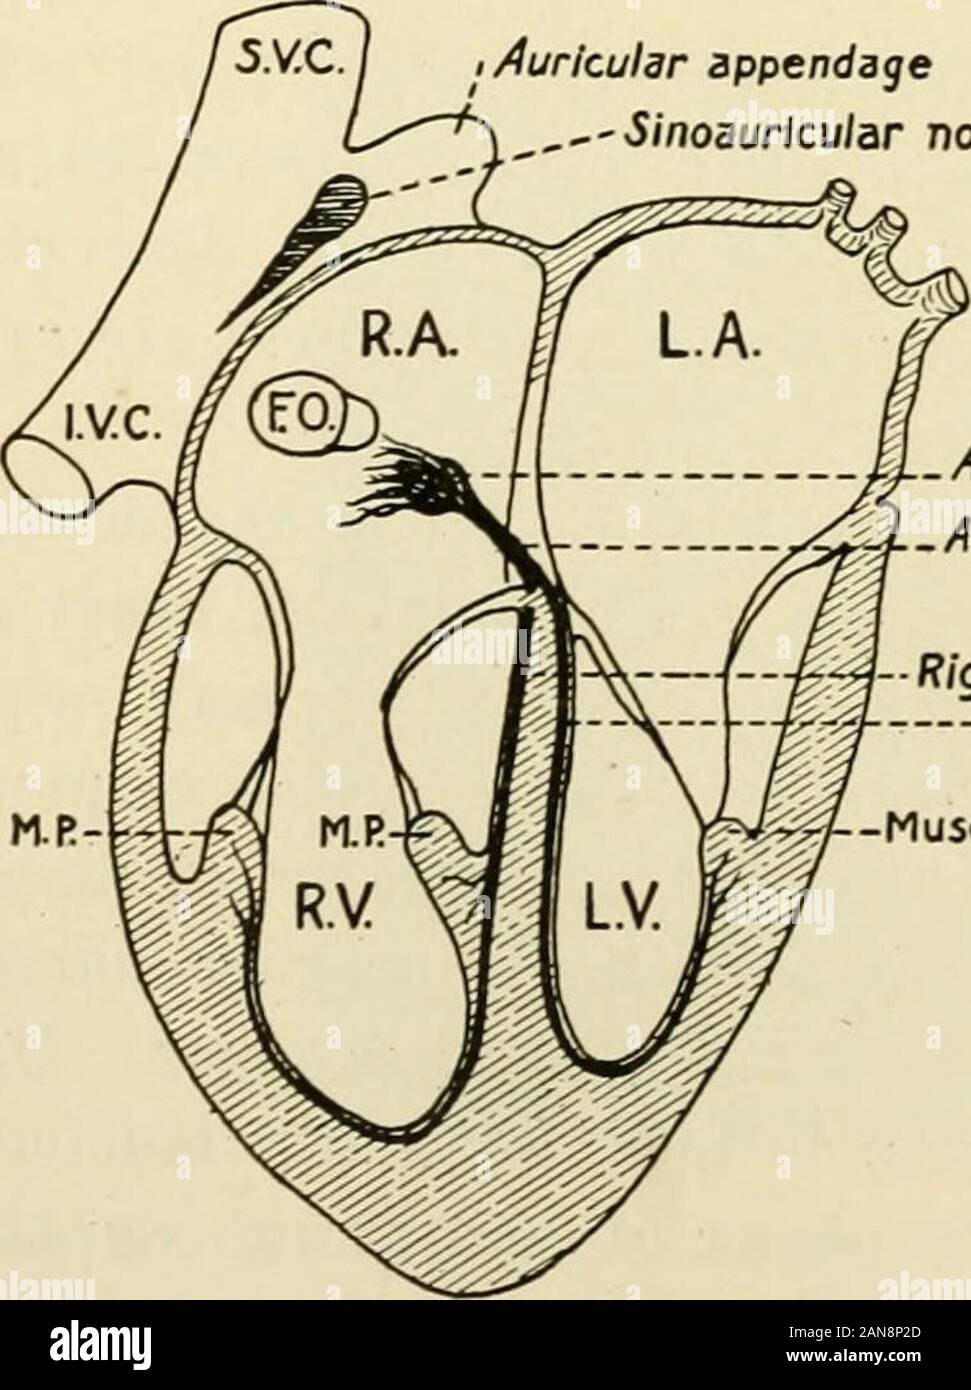 Physiology and biochemistry in modern medicine . Fig. 52.—Diagram of an auricle showing the arrangement of the muscle bands; the concen-tration point (C.P.); and the outline of the S.A. node (S.A.N.). The diagram is to scale, andillustrates by the circles and connecting dotted lines the method of leading off by paired contactsand the subsequent orientation. (From Thomas Lewis.) i Auricular appendage--5/noaurfcu/ar node. Auriculoventricular nodeAurlculoventricular bundle Rights left ventricularbundles Musculi papillares Fig. 53.—Diagram to show the general ramifications of the conducting tissue Stock Photo